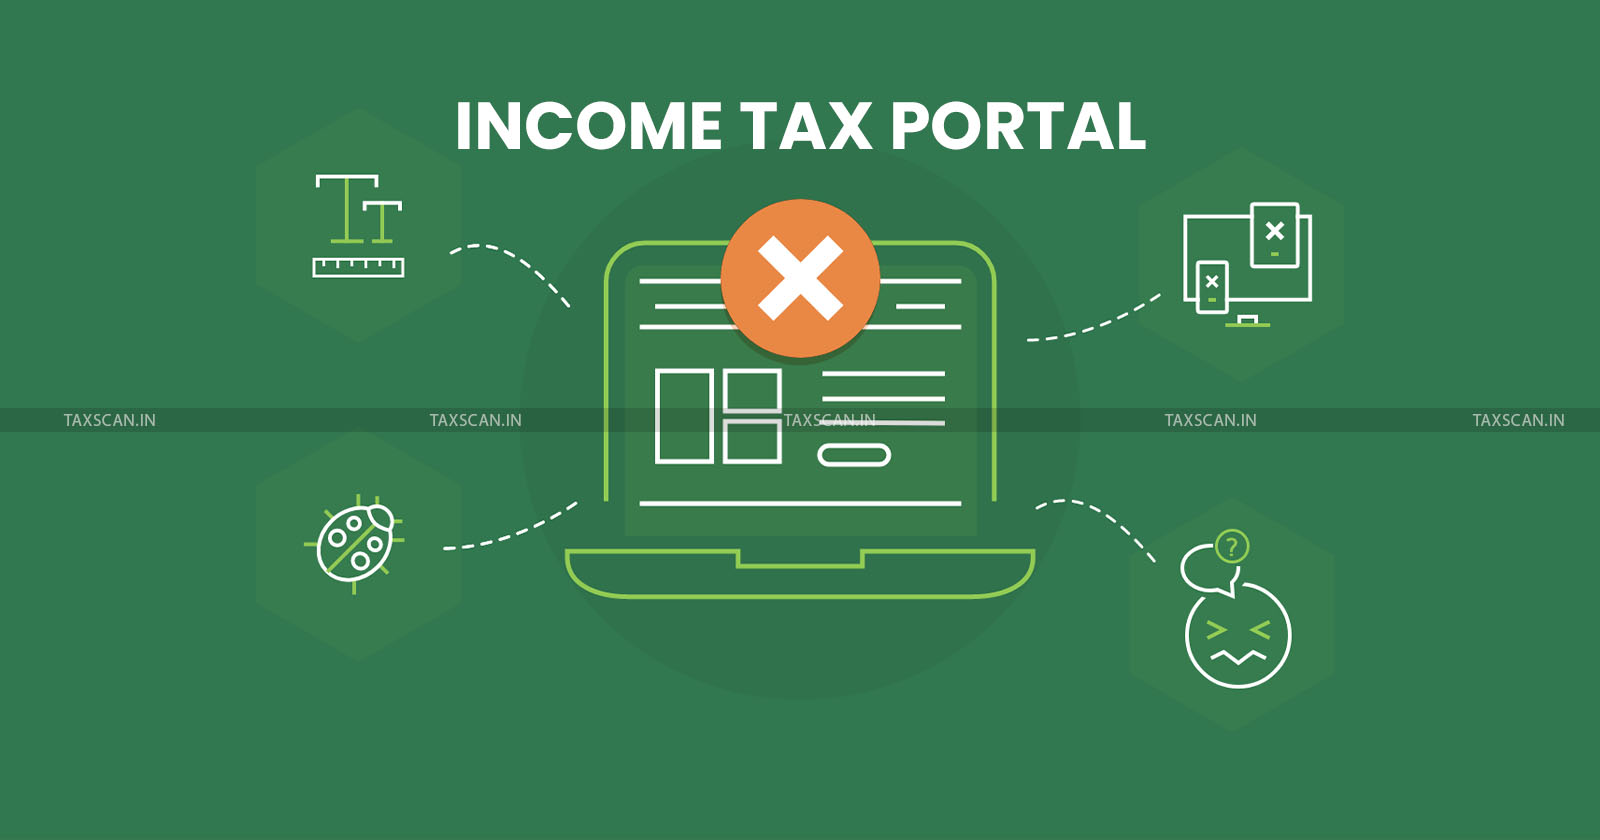 Upload Appeal - Technical problems - Kerala high court - Income Tax Portal - appeal - taxscan